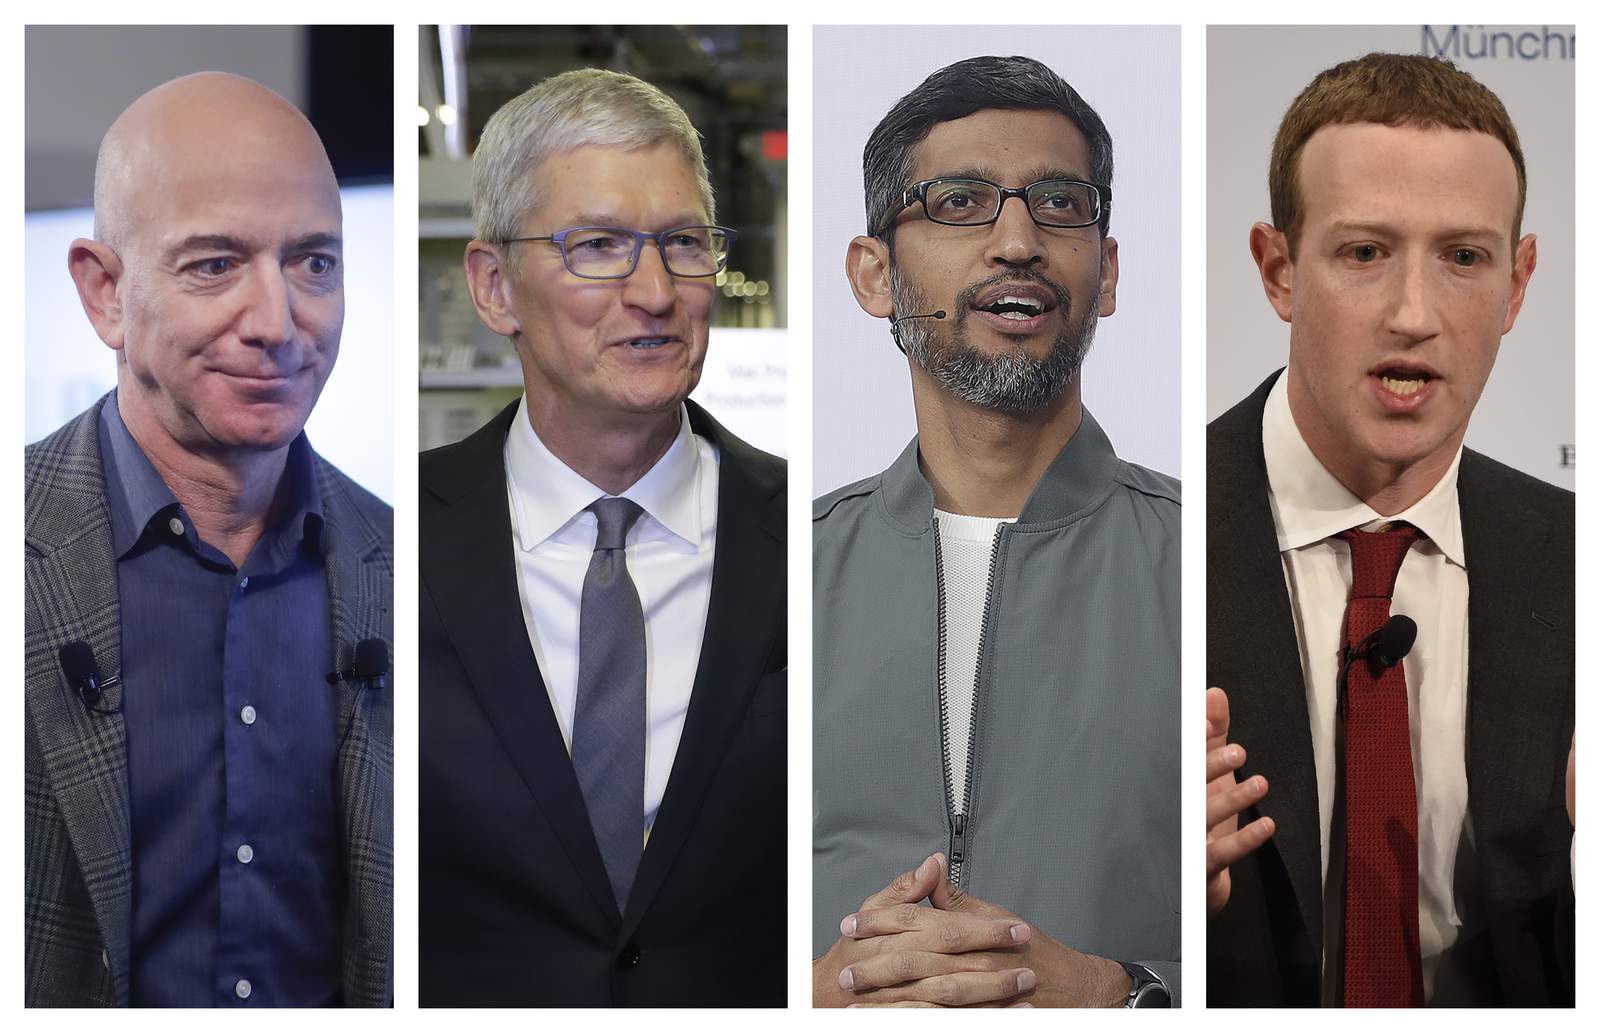 Spotlight on 4 Big Tech CEOs testifying in competition probe